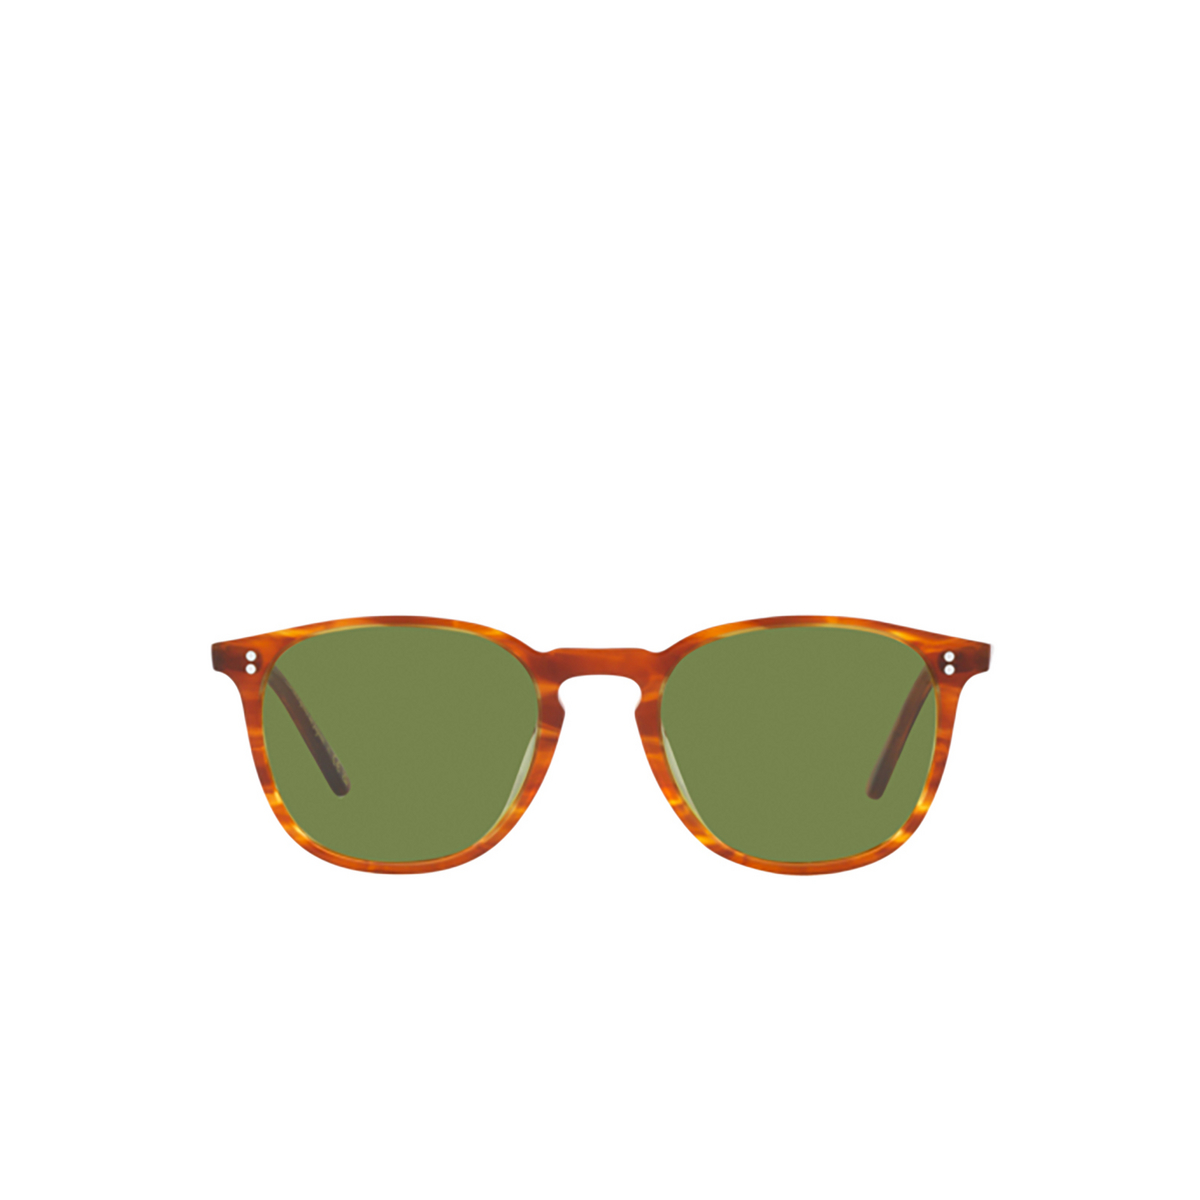 Oliver Peoples FINLEY 1993 Sunglasses 174252 Sugi Tortoise - front view